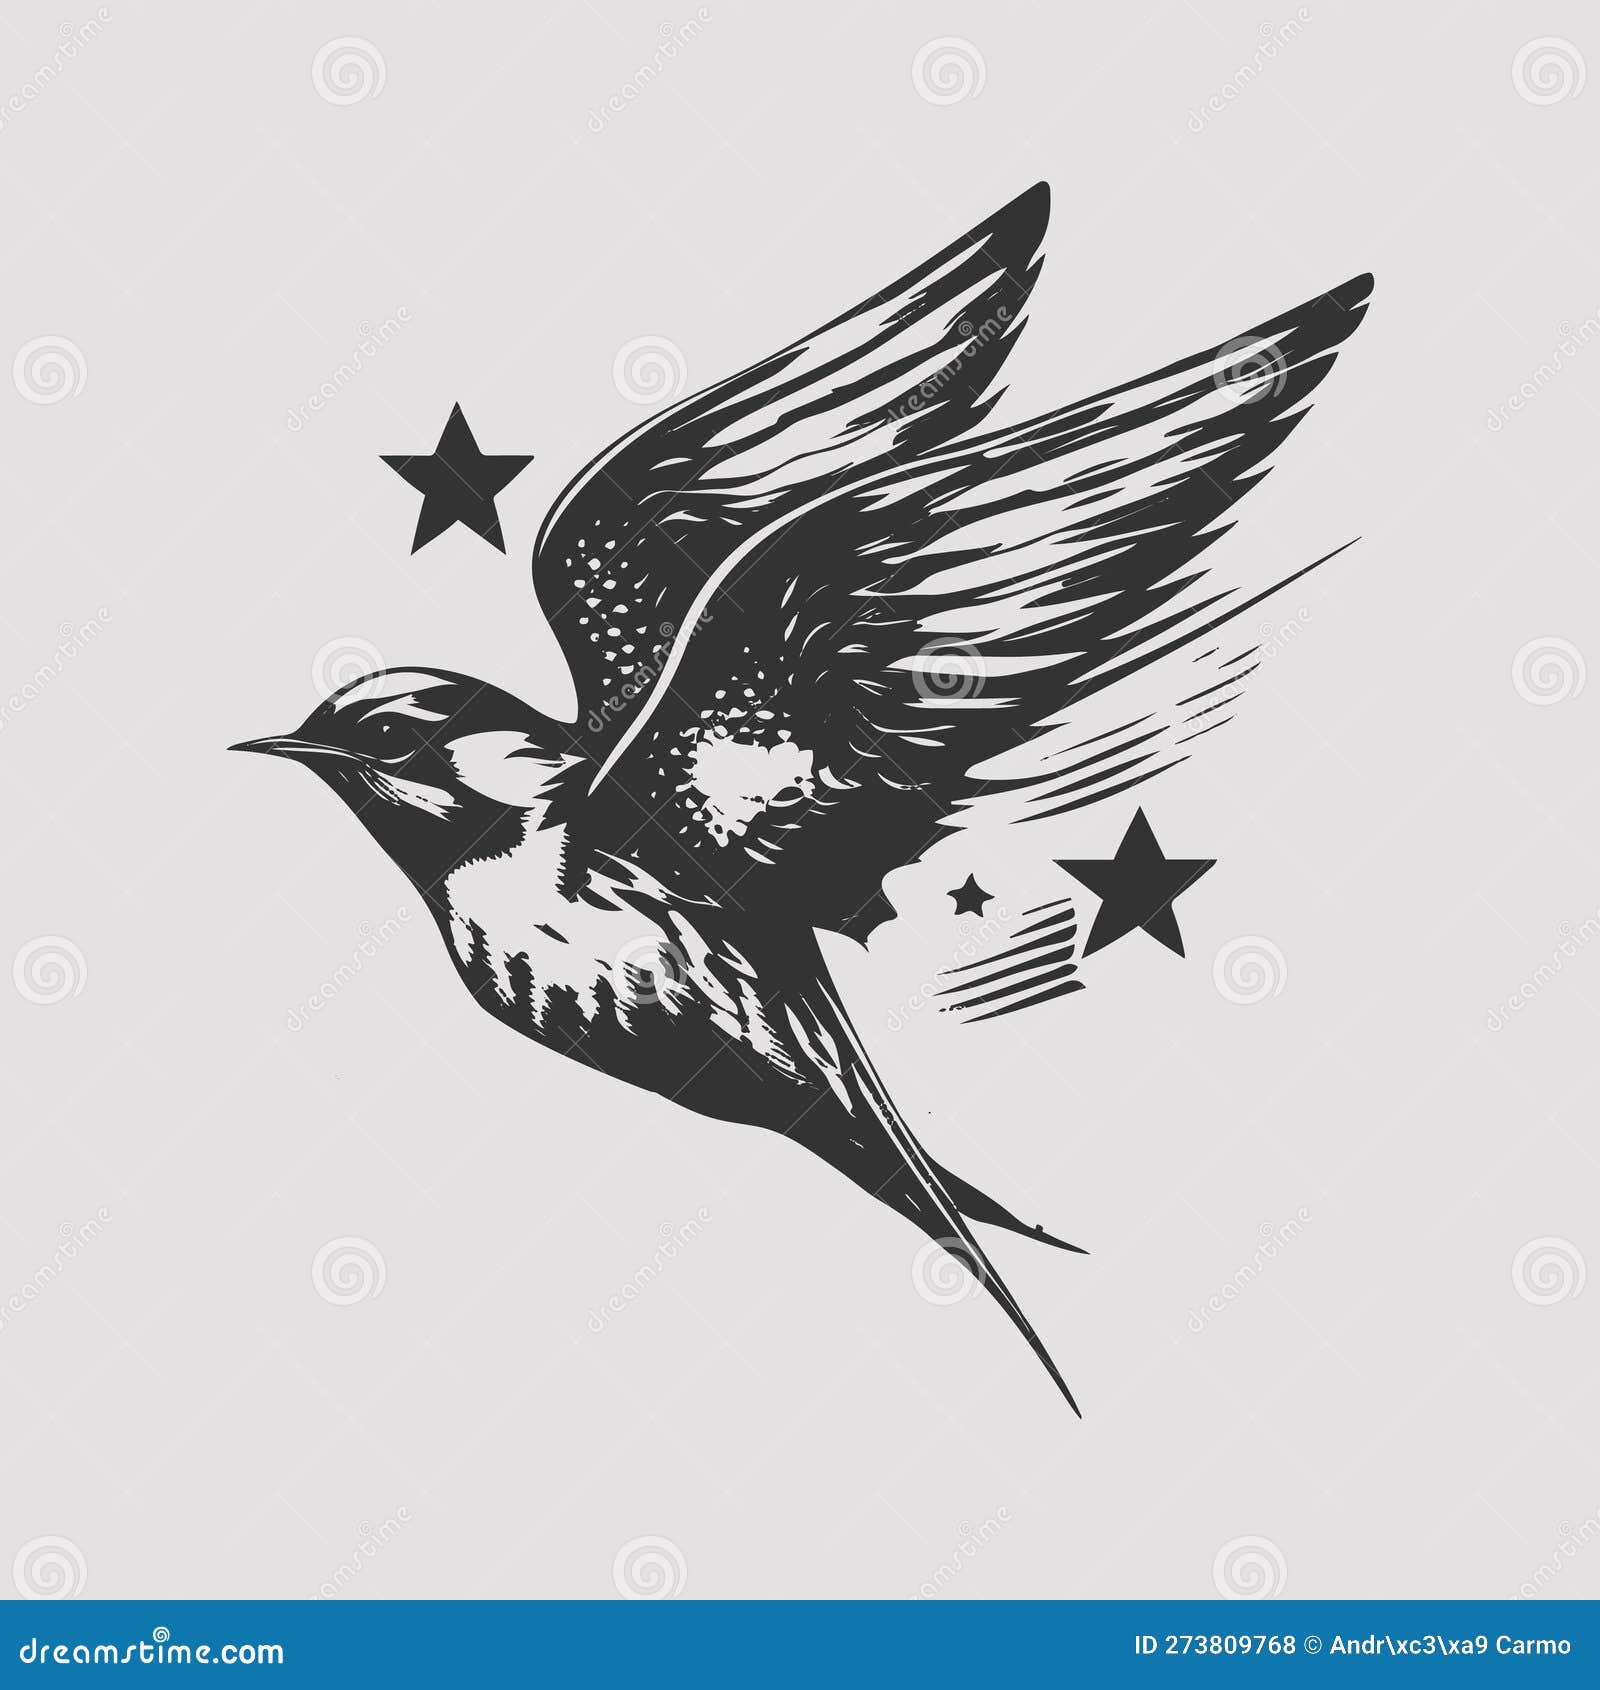 434,515 Black Bird Vector Royalty-Free Images, Stock Photos & Pictures |  Shutterstock